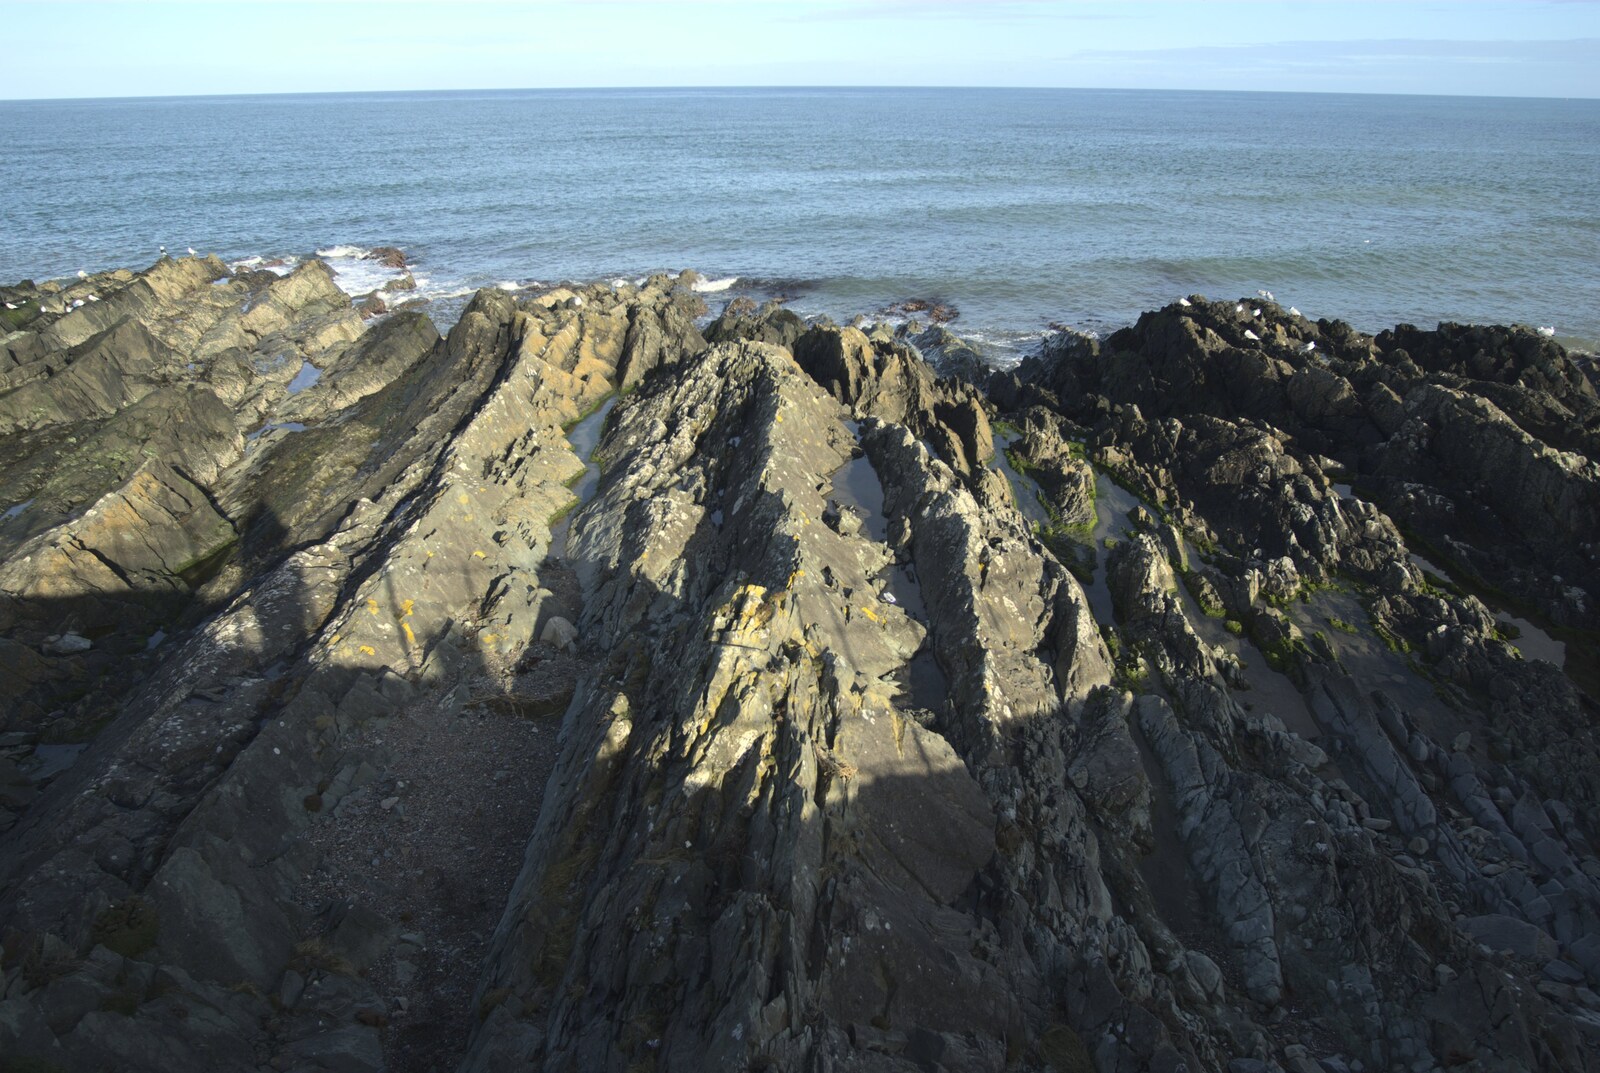 Jagged rocks by the sea from A Day in Greystones, County Dublin, Ireland - 28th February 2010